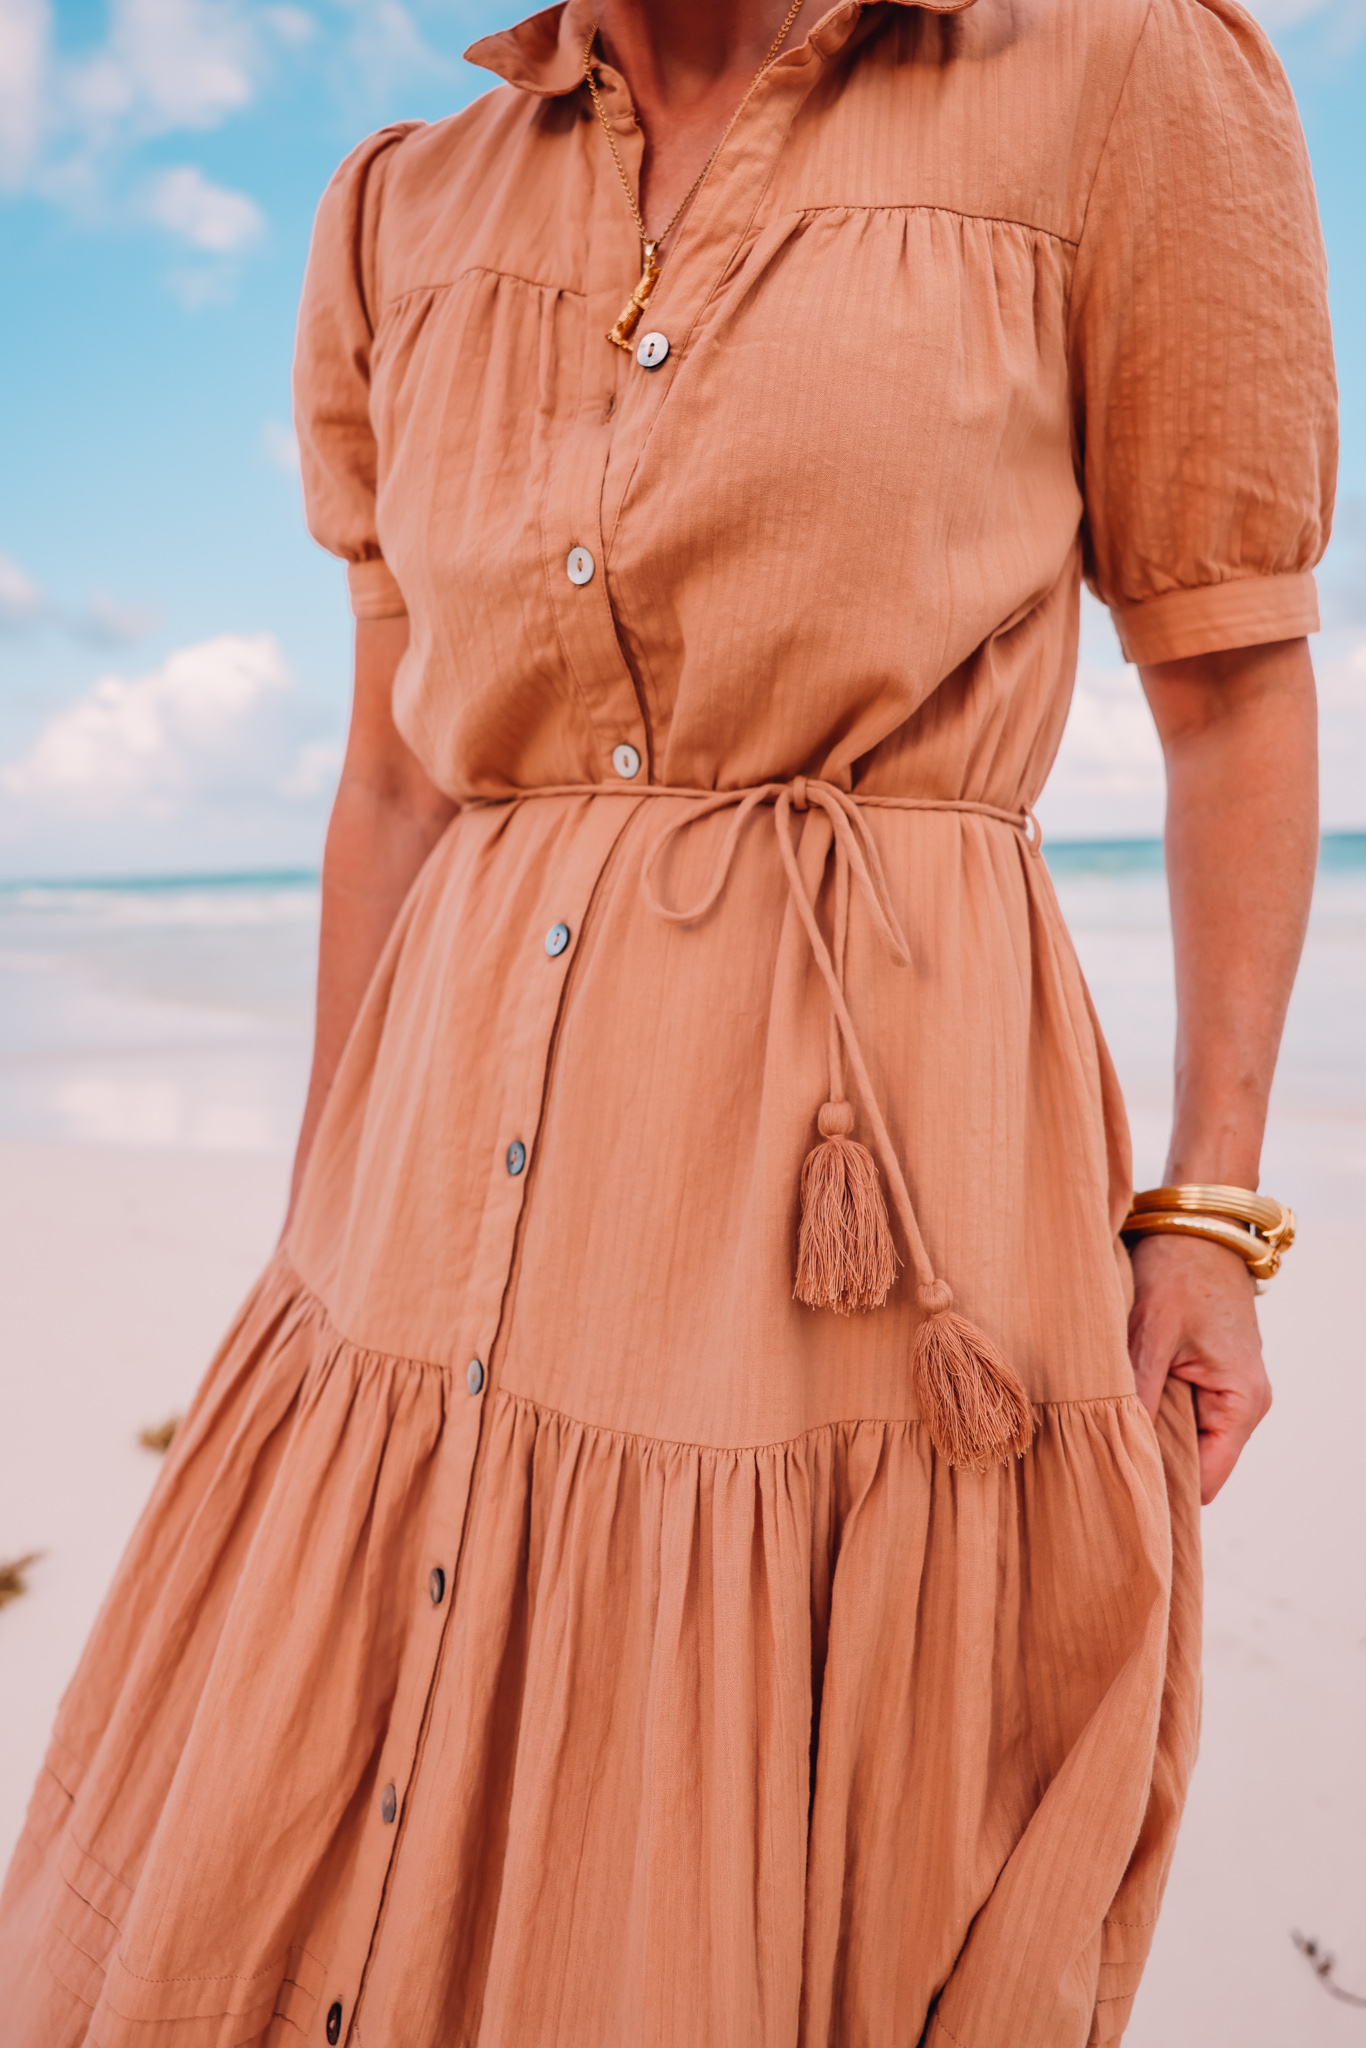 cleobella tiered midi dress, midi dress, summer dresses, mother's day dresses, what to wear mother's day, erin busbee